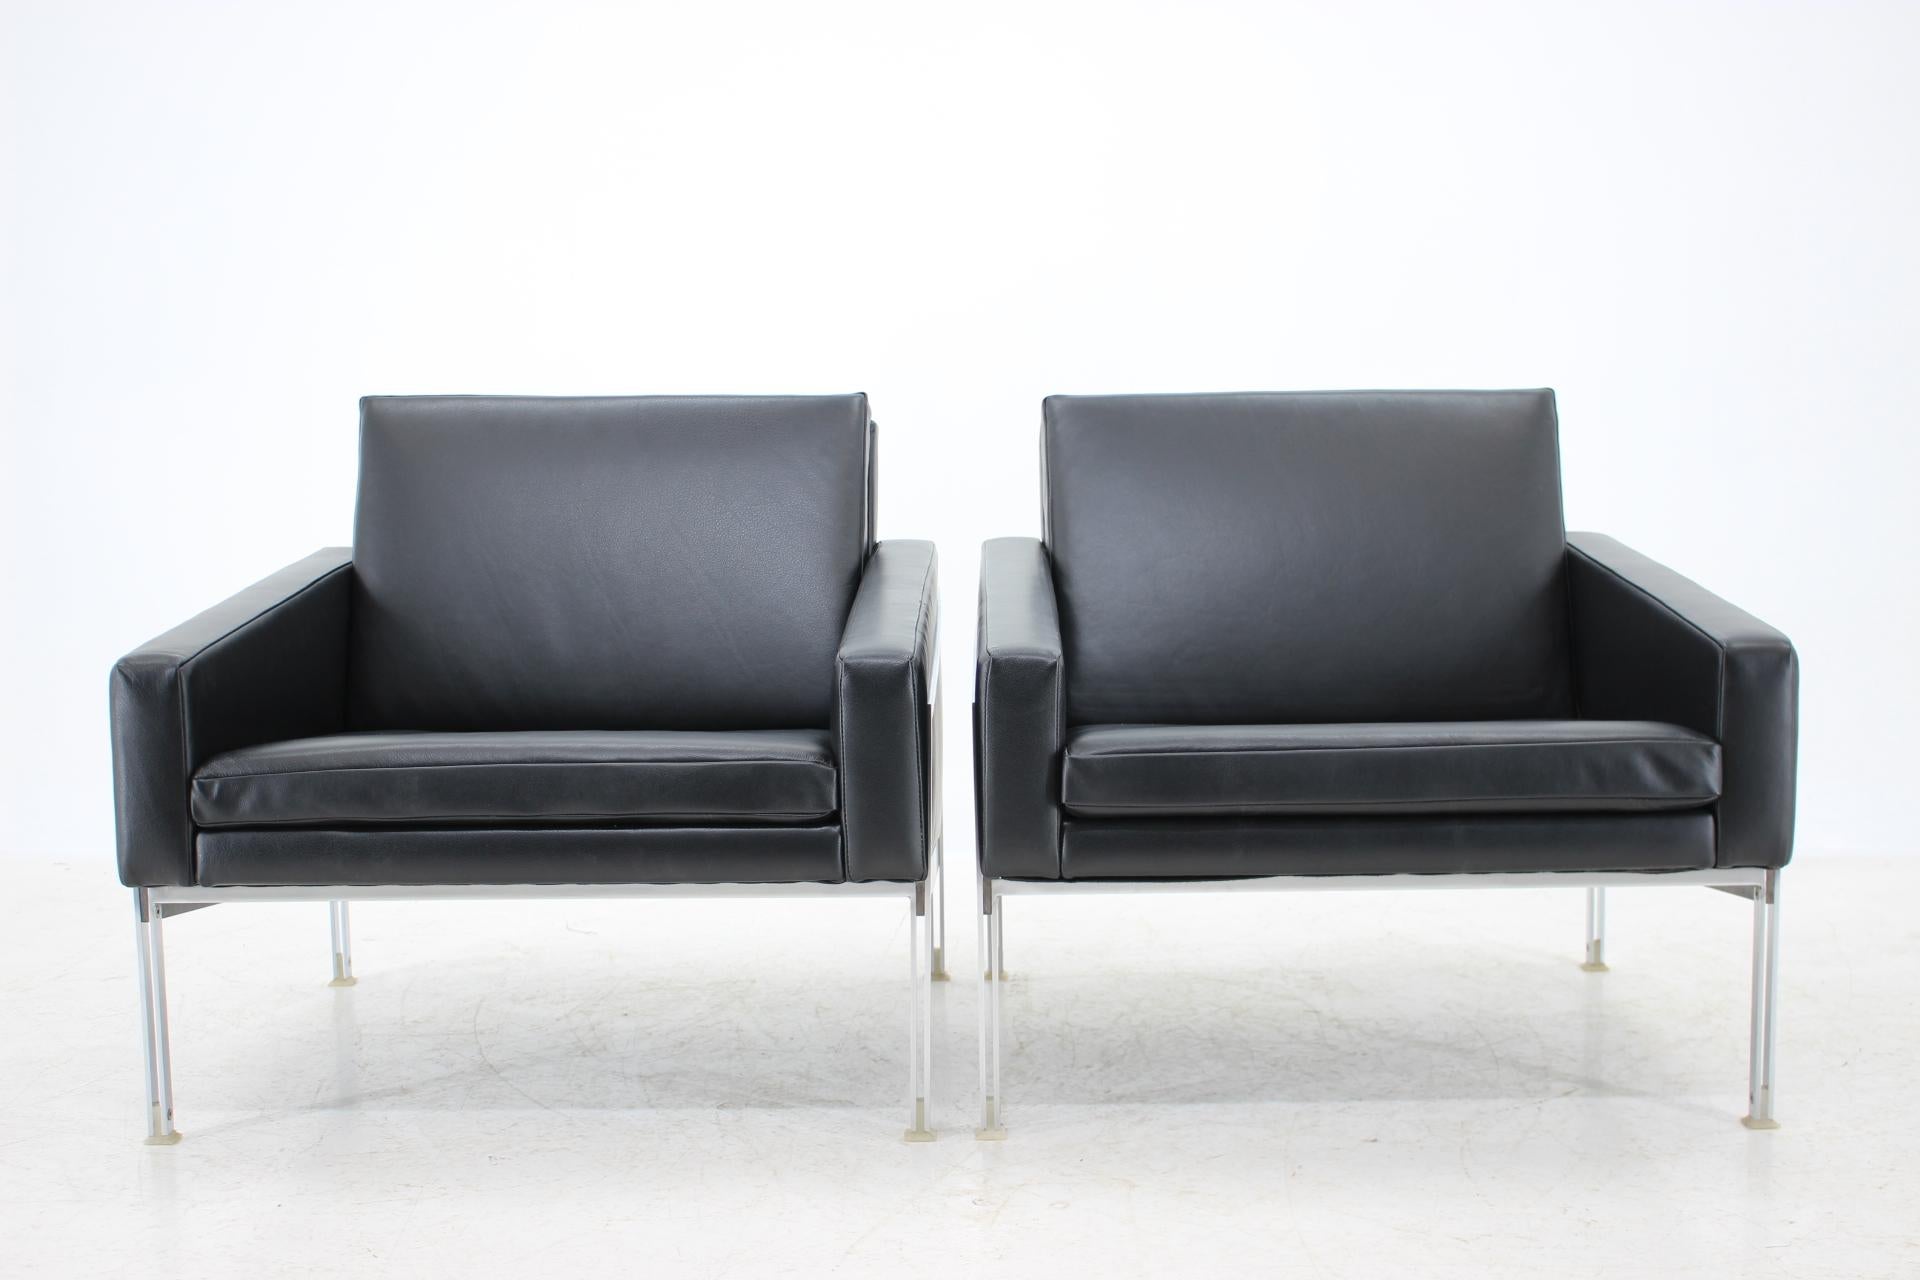 - Newly upholstered in black leather
- Produced and labeled by Lübke
- The steel frame was re-polished
- Designed by Wolfgang Herren.